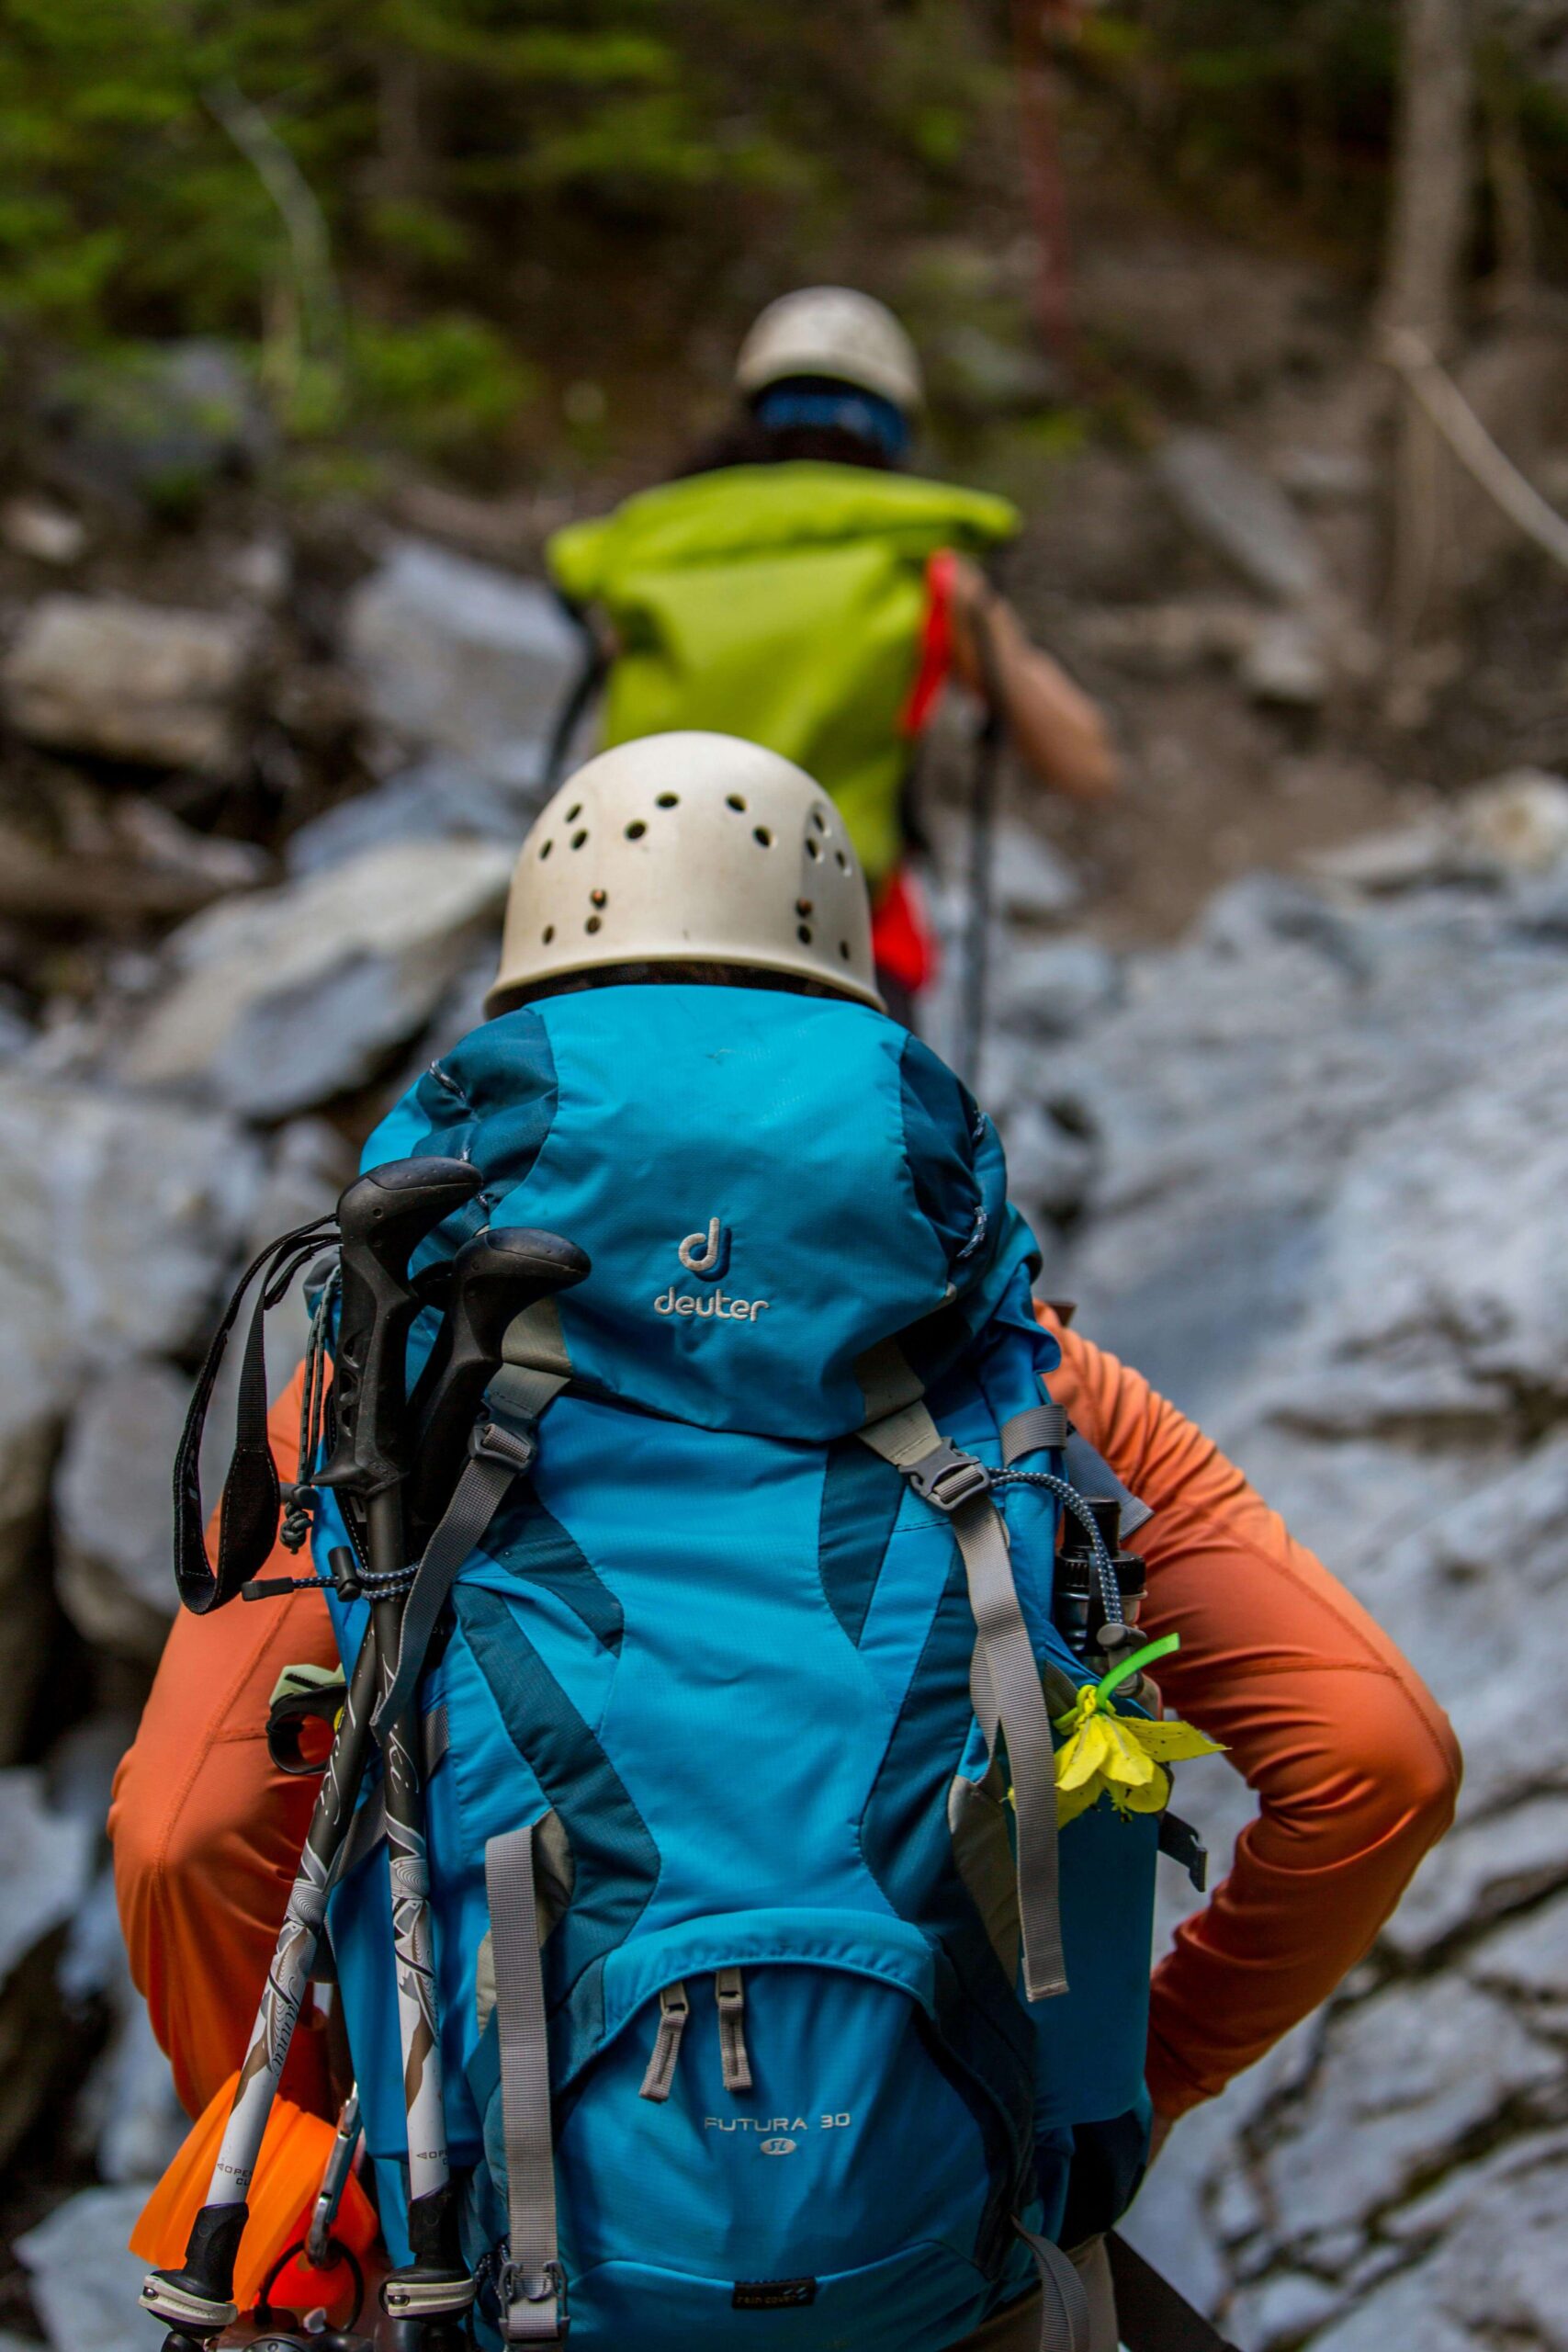 a picture of a trekker wearing orange suit with a blue back pack used by a tour planner website Adventure Tunes